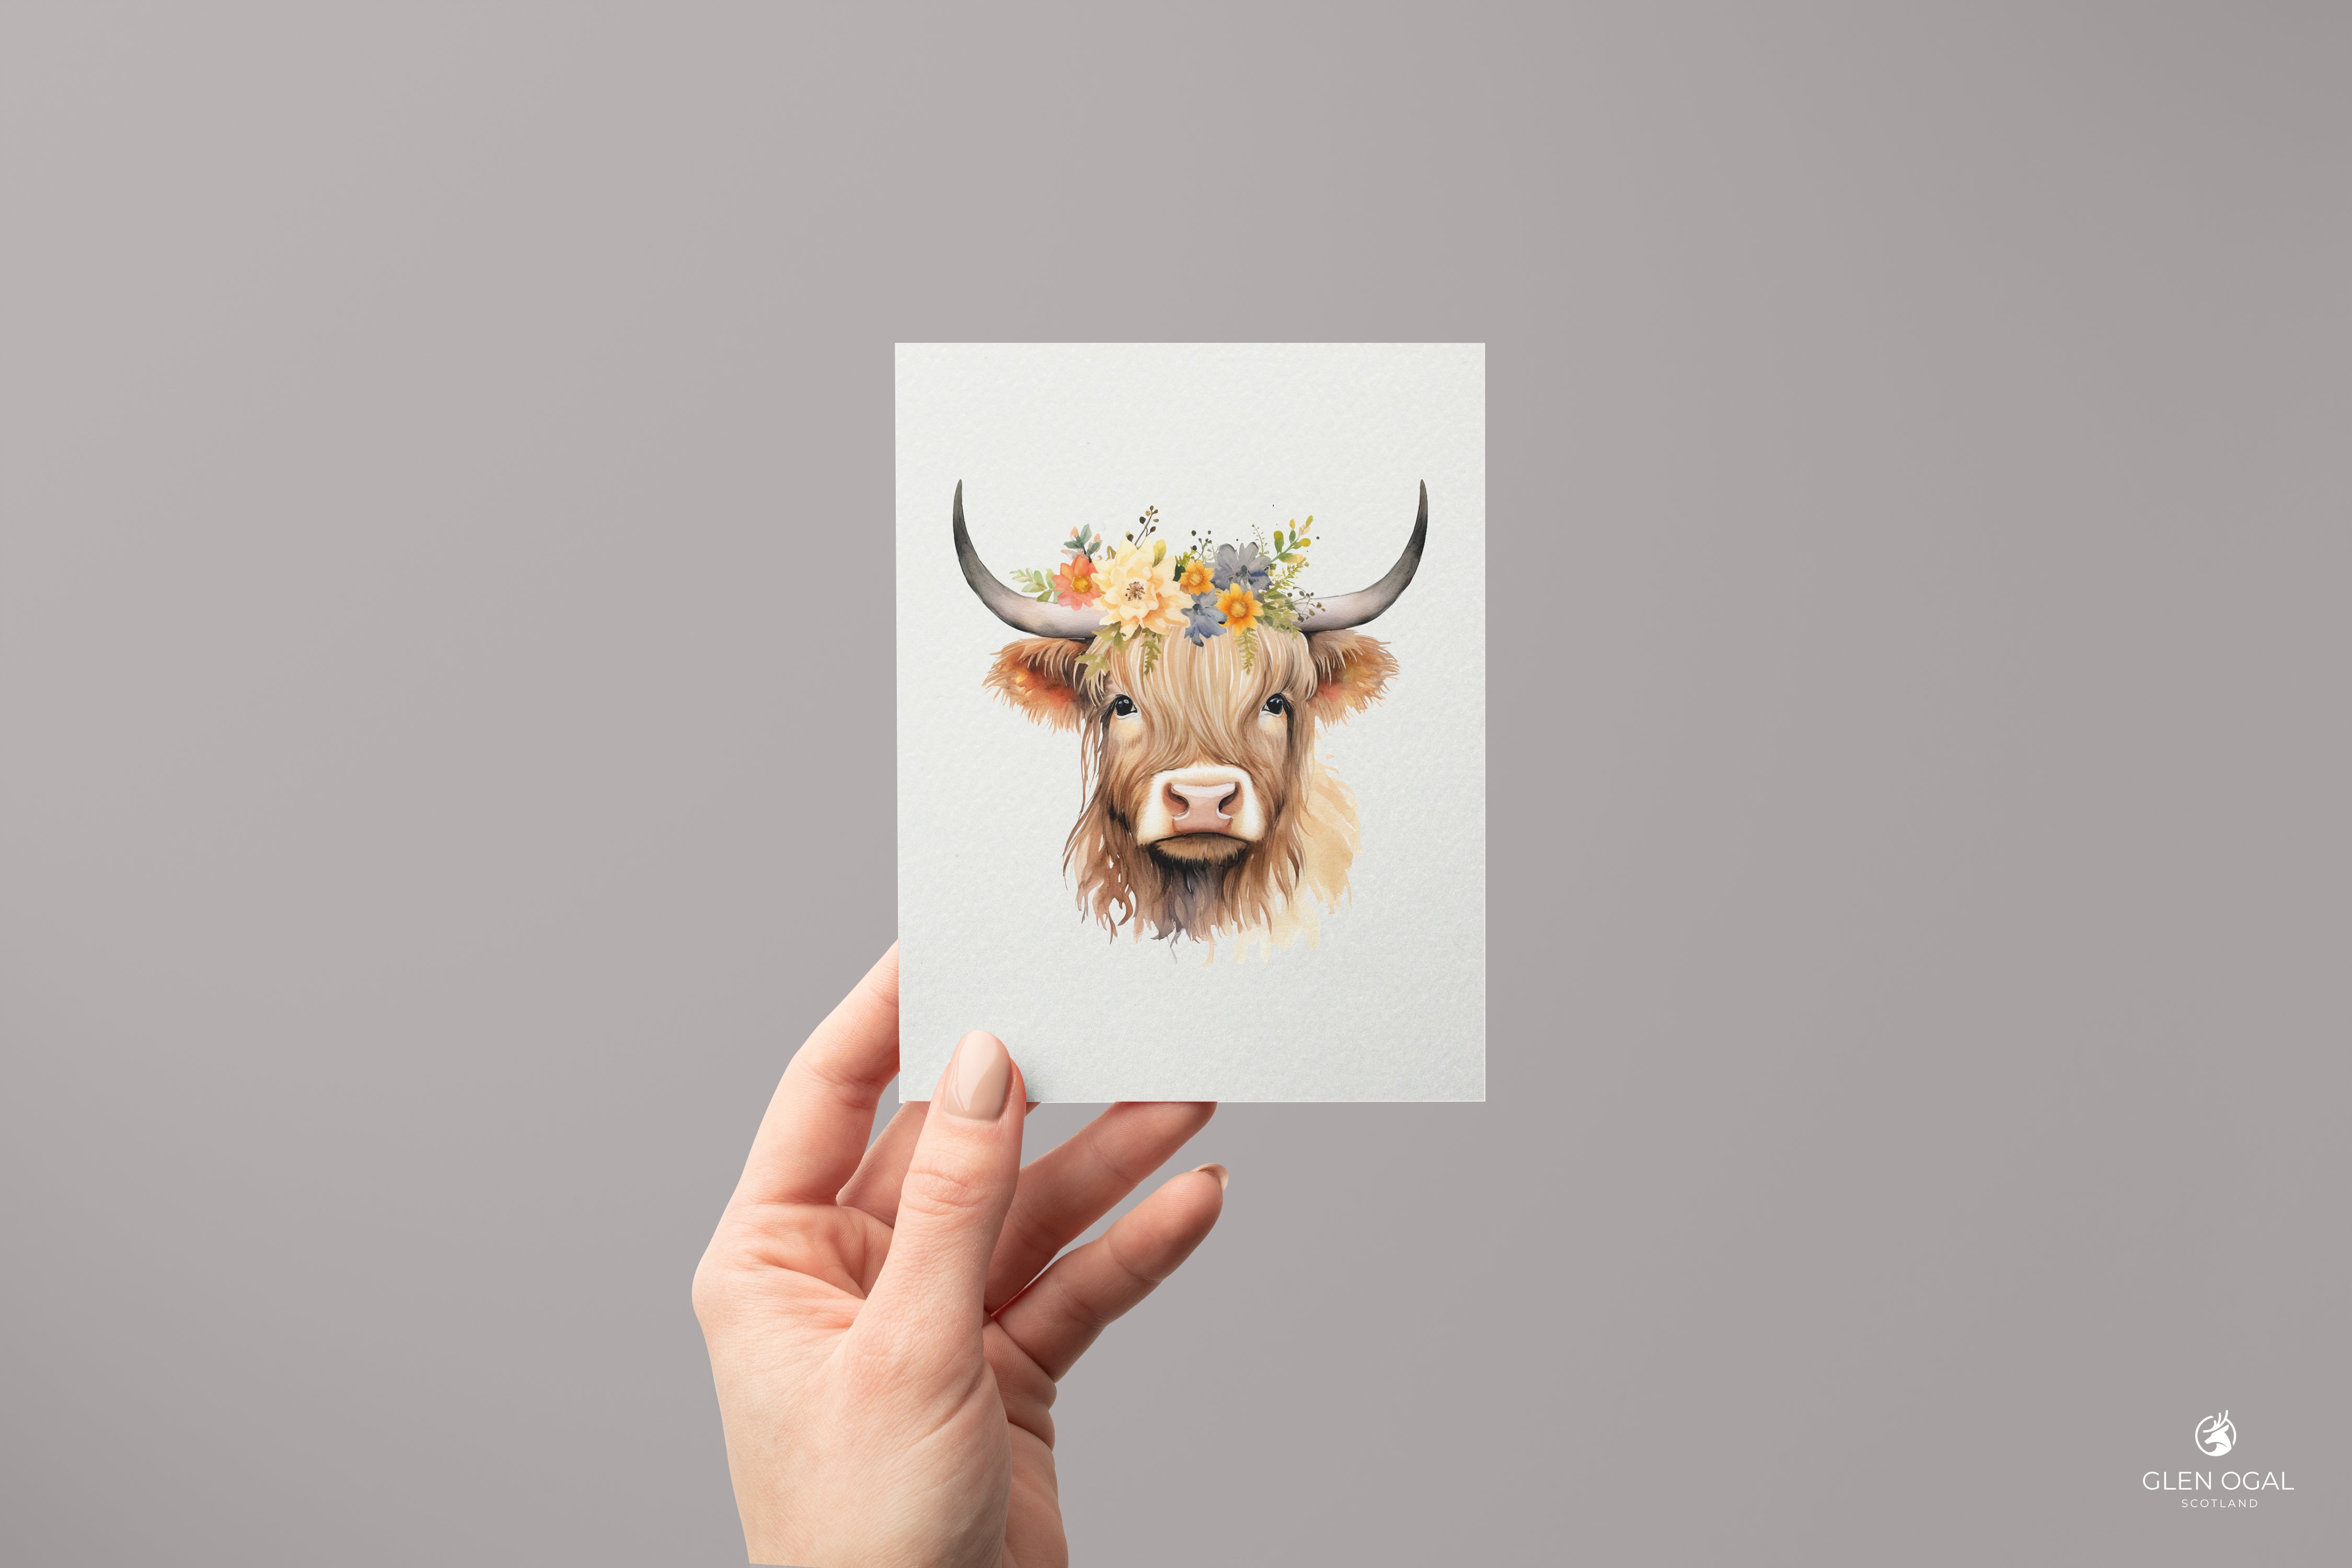 Pack of 5 Floral Highland Cow Note Cards